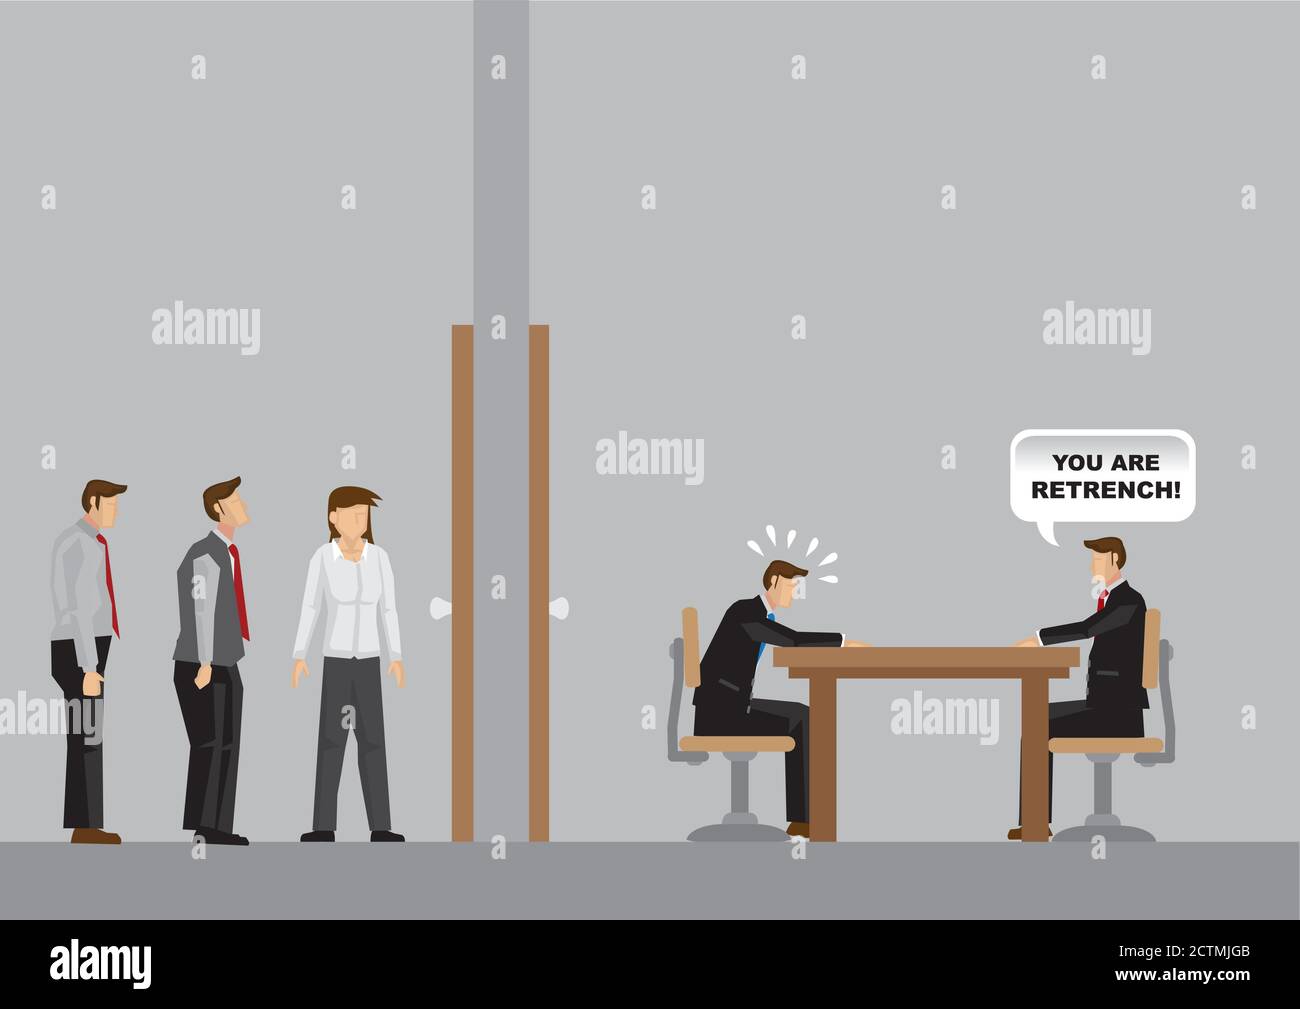 Business professionals waiting outside office. Inside office, manager informs employee about retrenchment news. Cartoon vector illustration on company Stock Vector